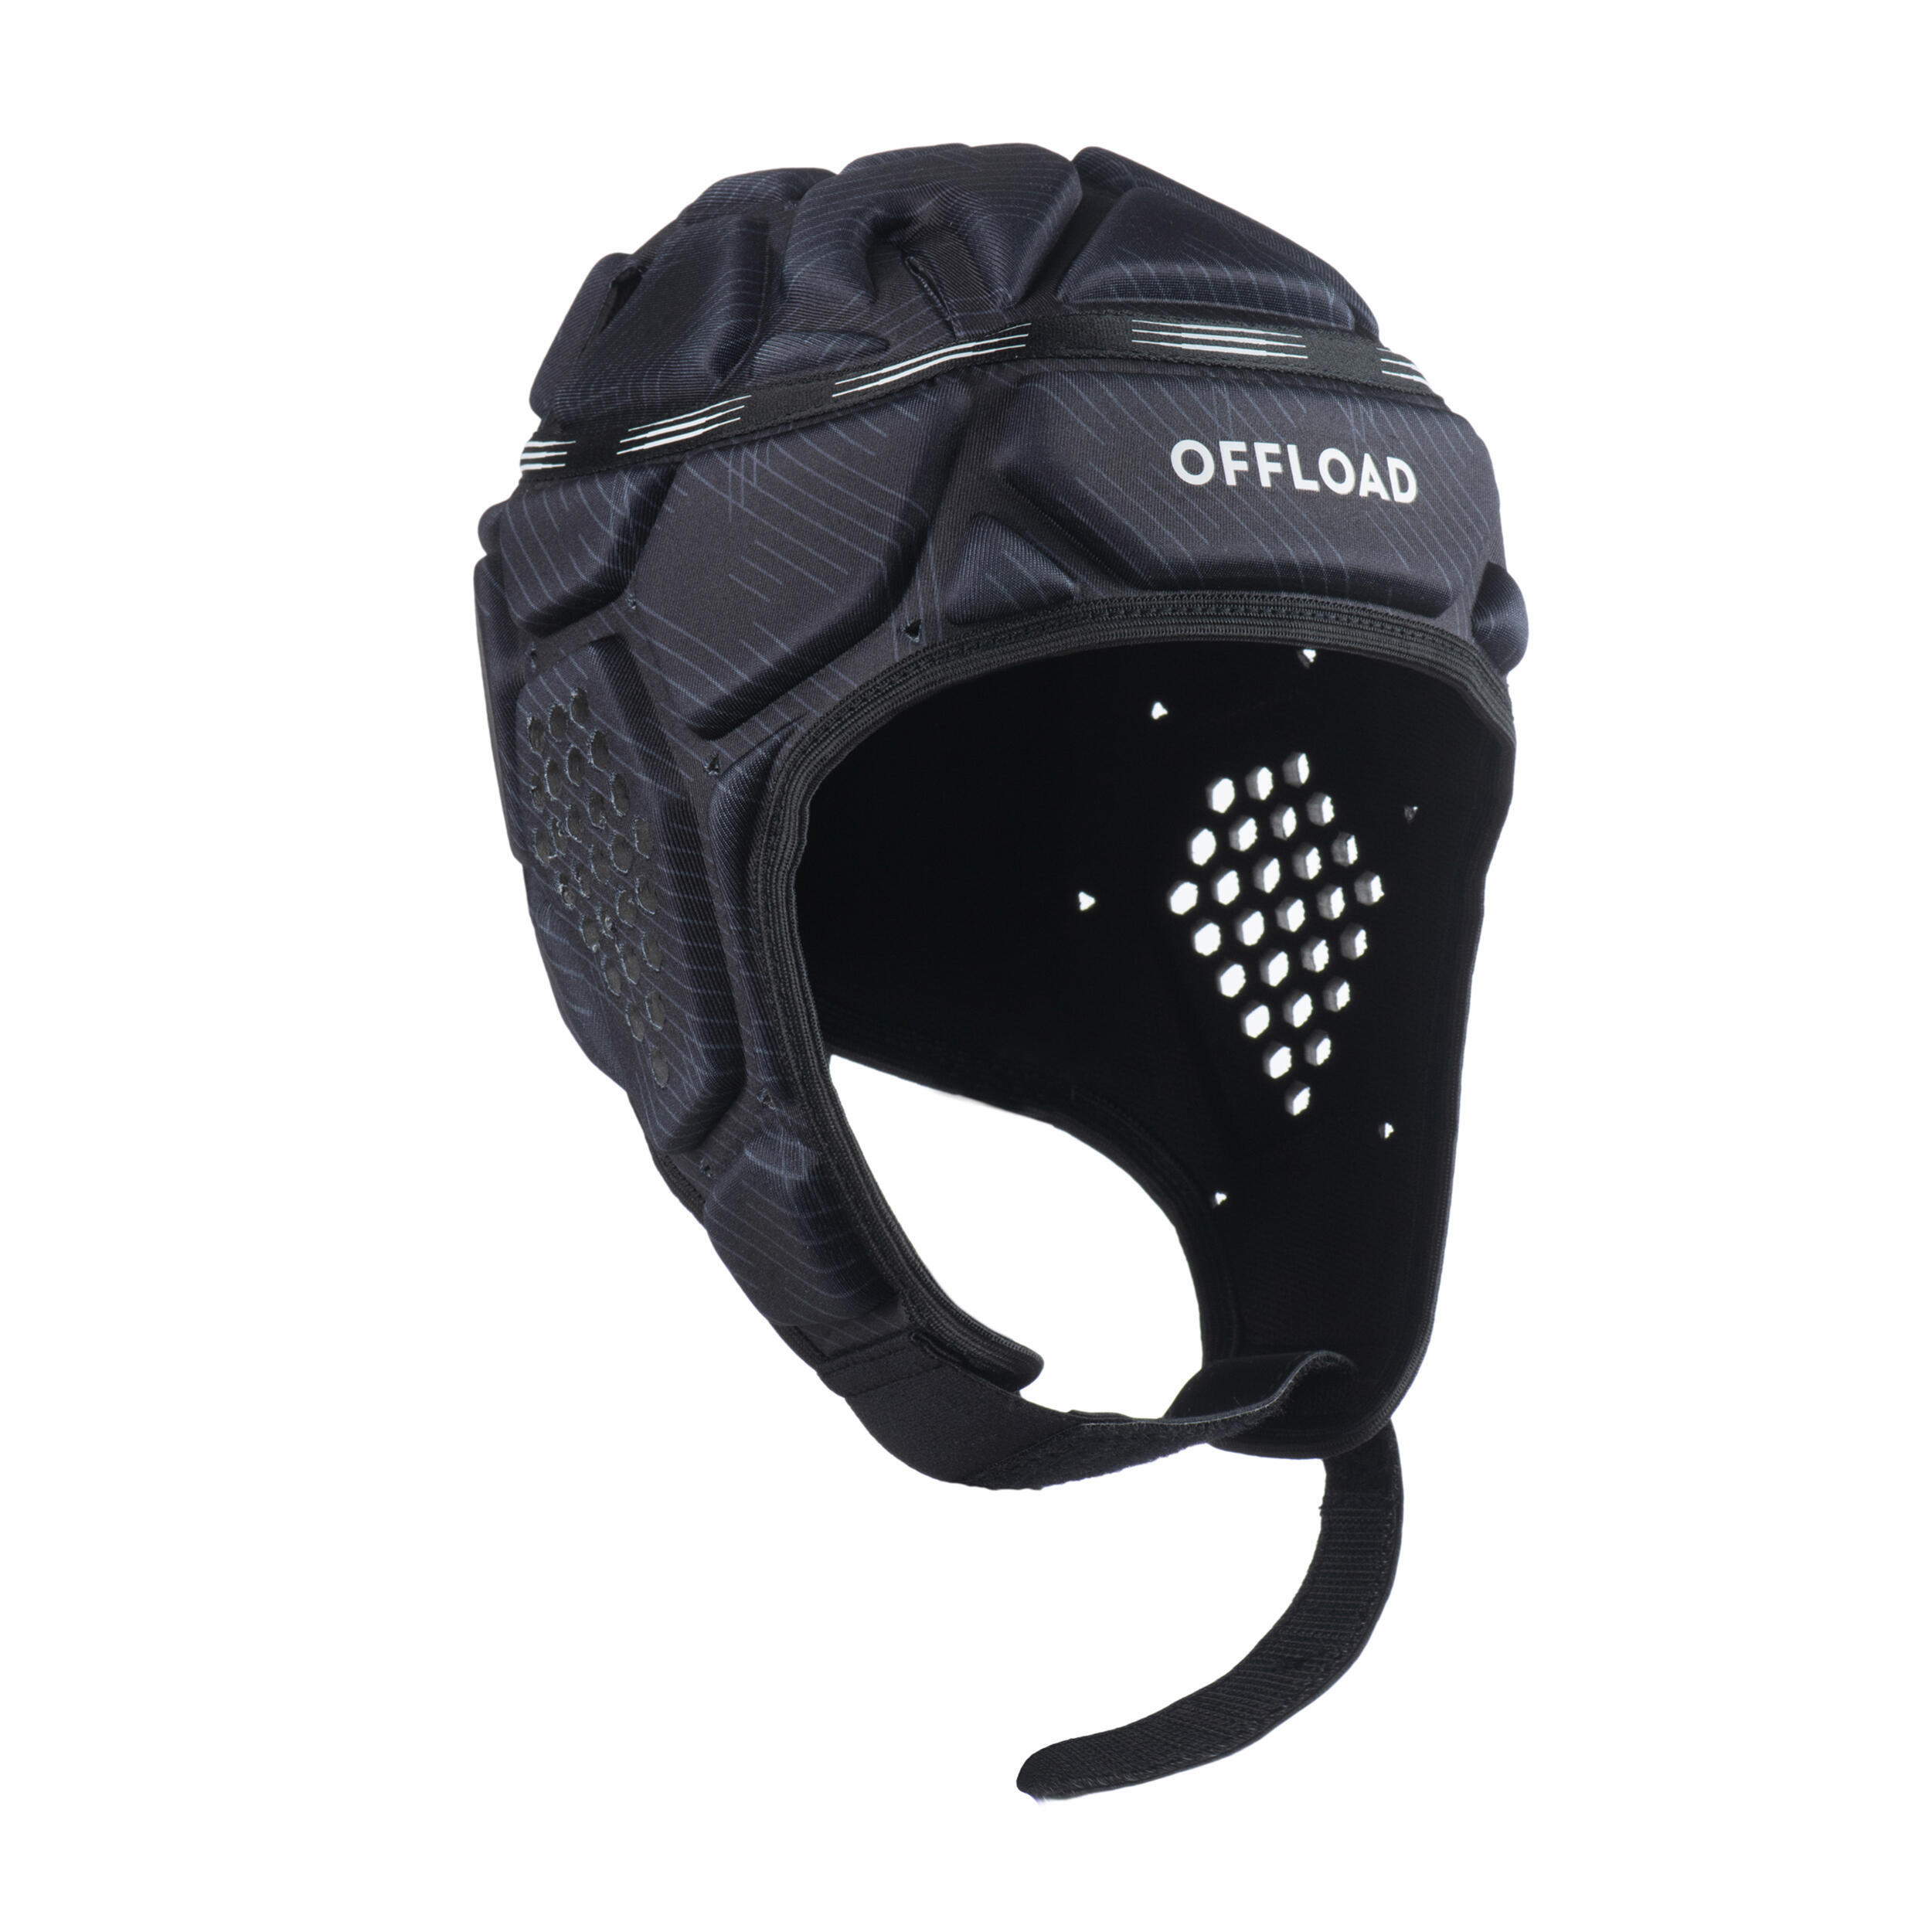 casco-rugby-offload-r500-adulto-negro.jpg